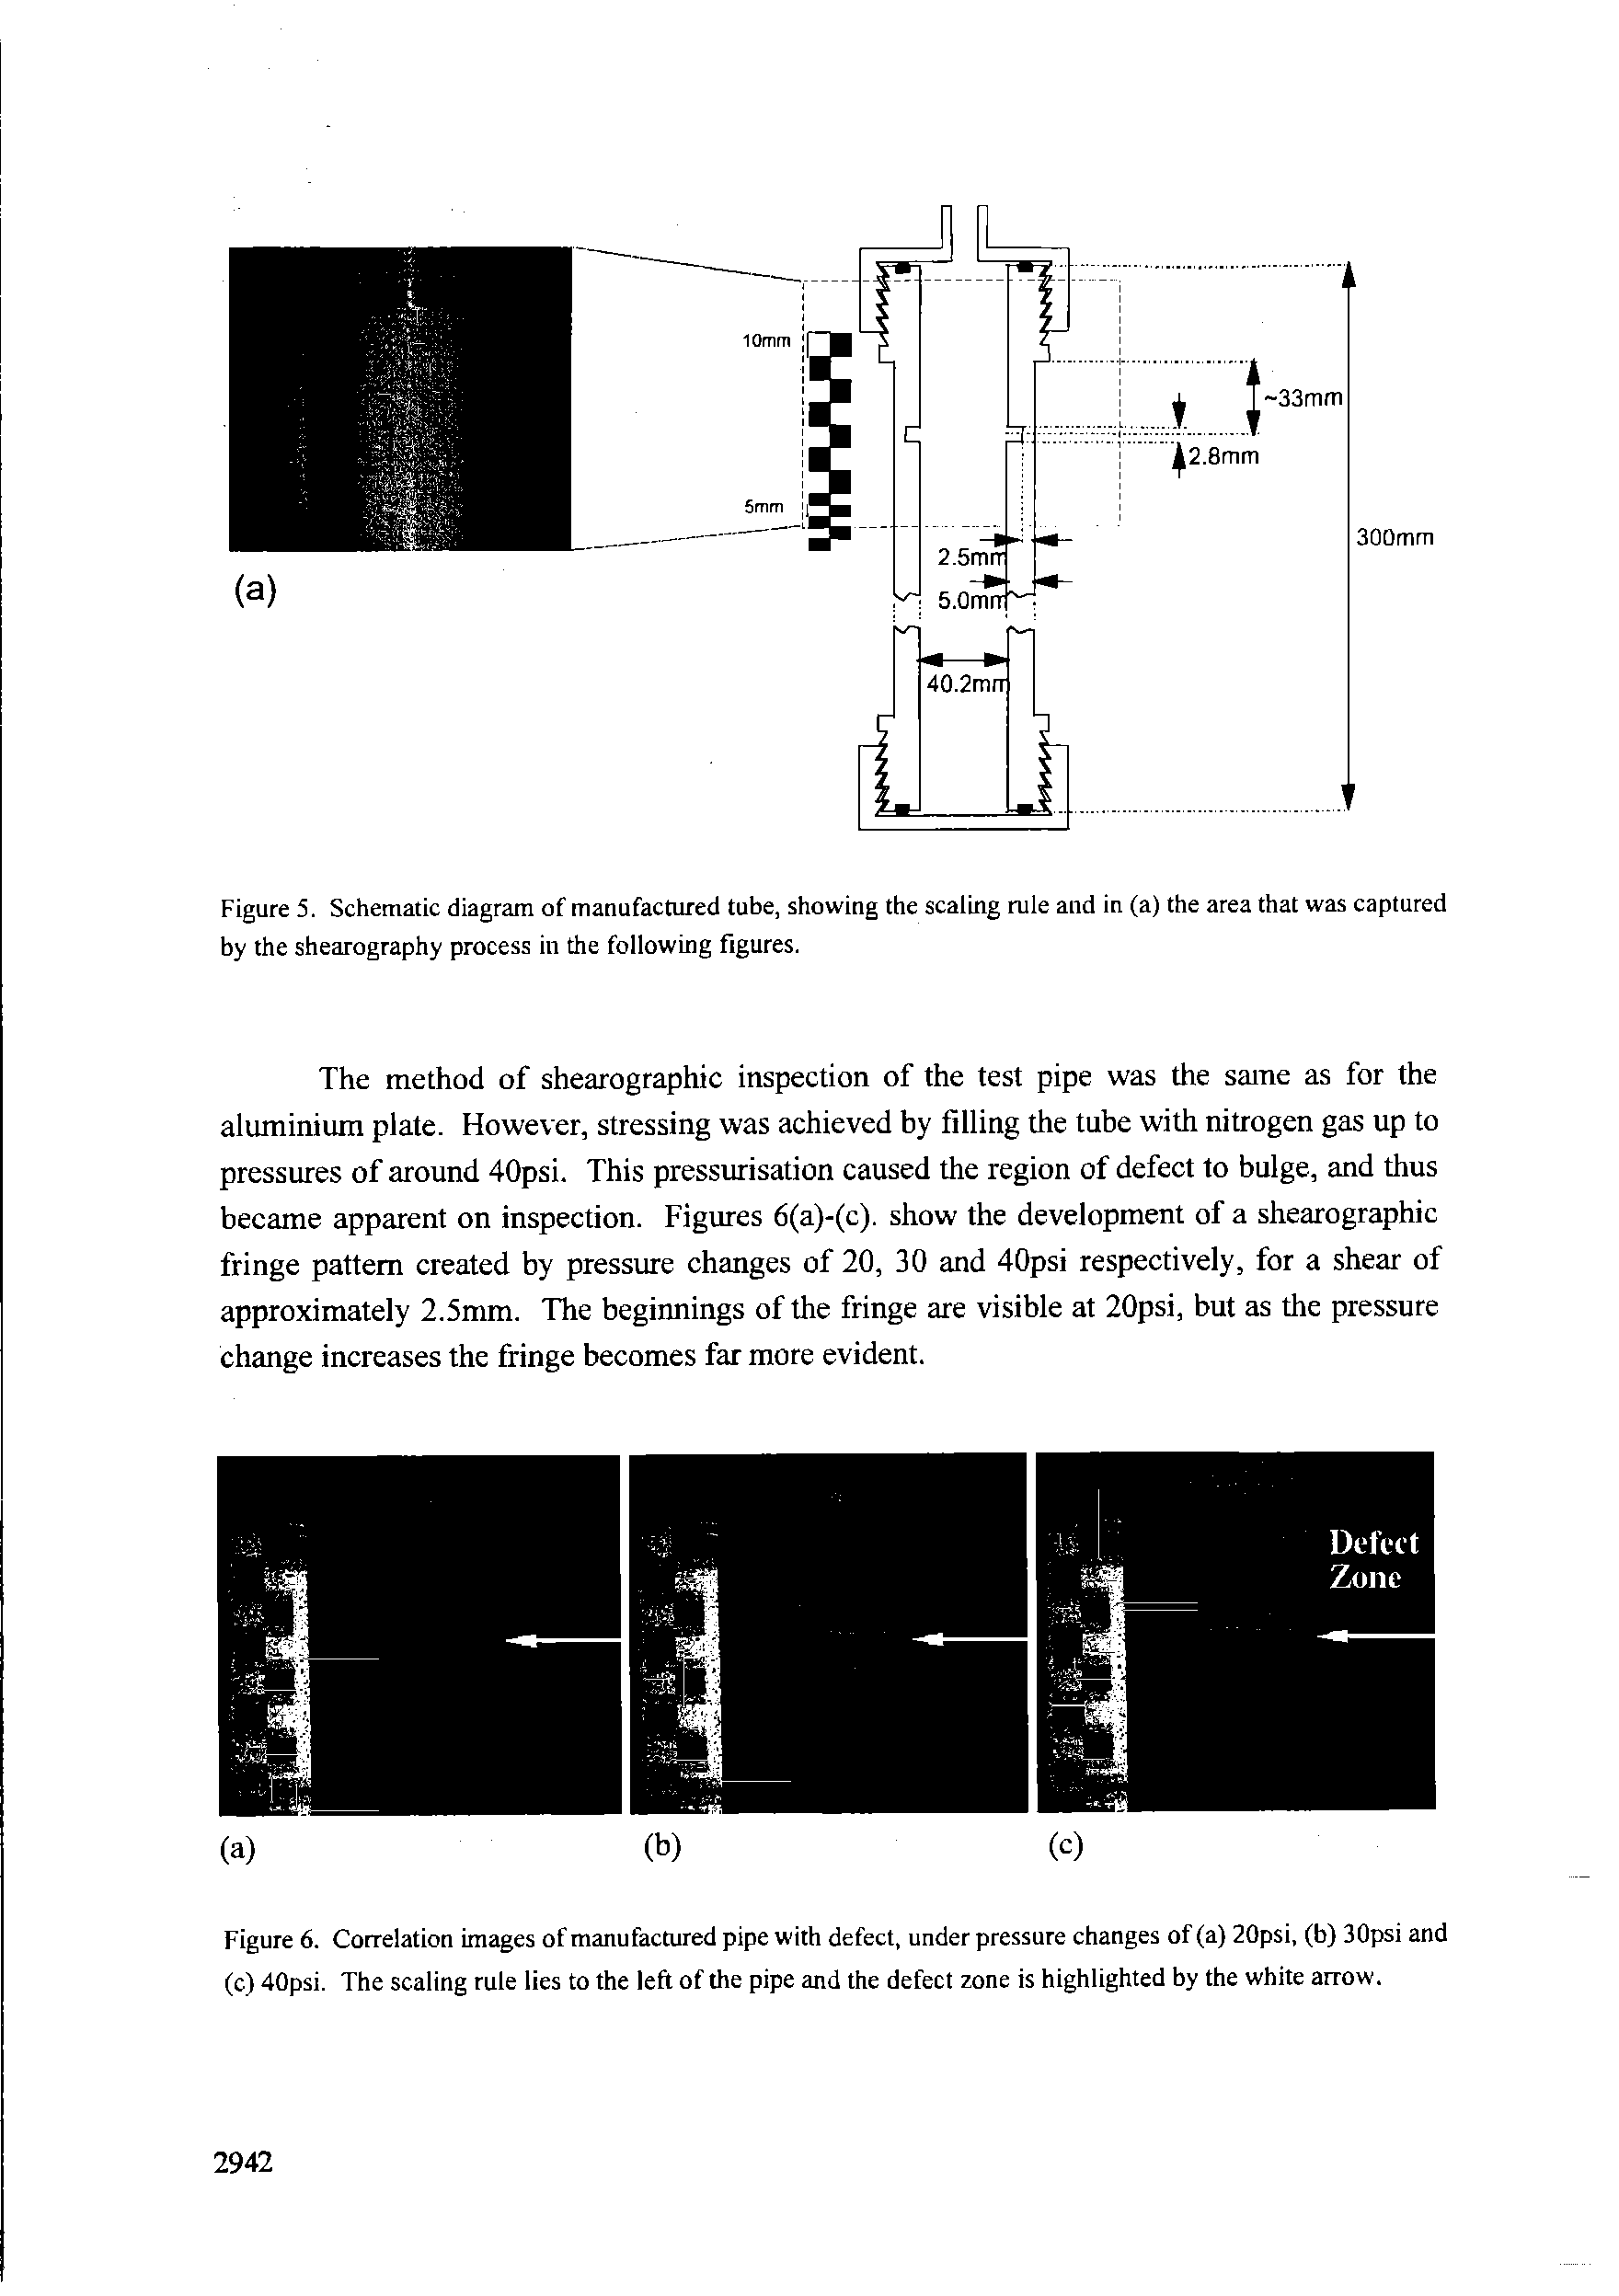 Figure 6. Correlation images of manufactured pipe with defect, under pressure changes of (a) 20psi, (b) 30psi and (e) 40psi. The sealing rule lies to the left of the pipe and the defect zone is highlighted by the white arrow.